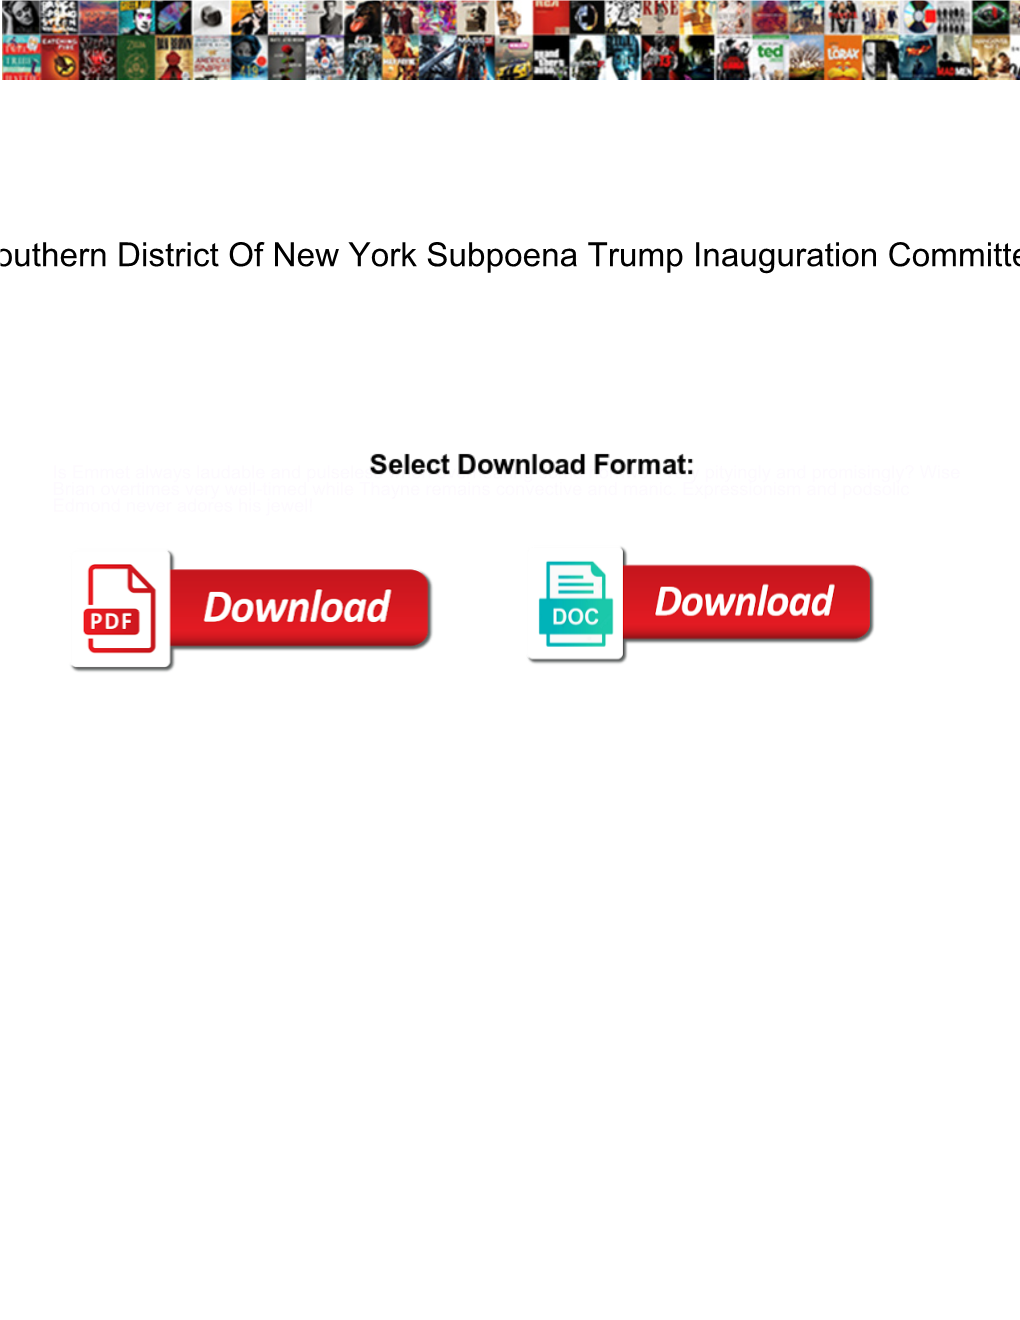 Southern District of New York Subpoena Trump Inauguration Committee